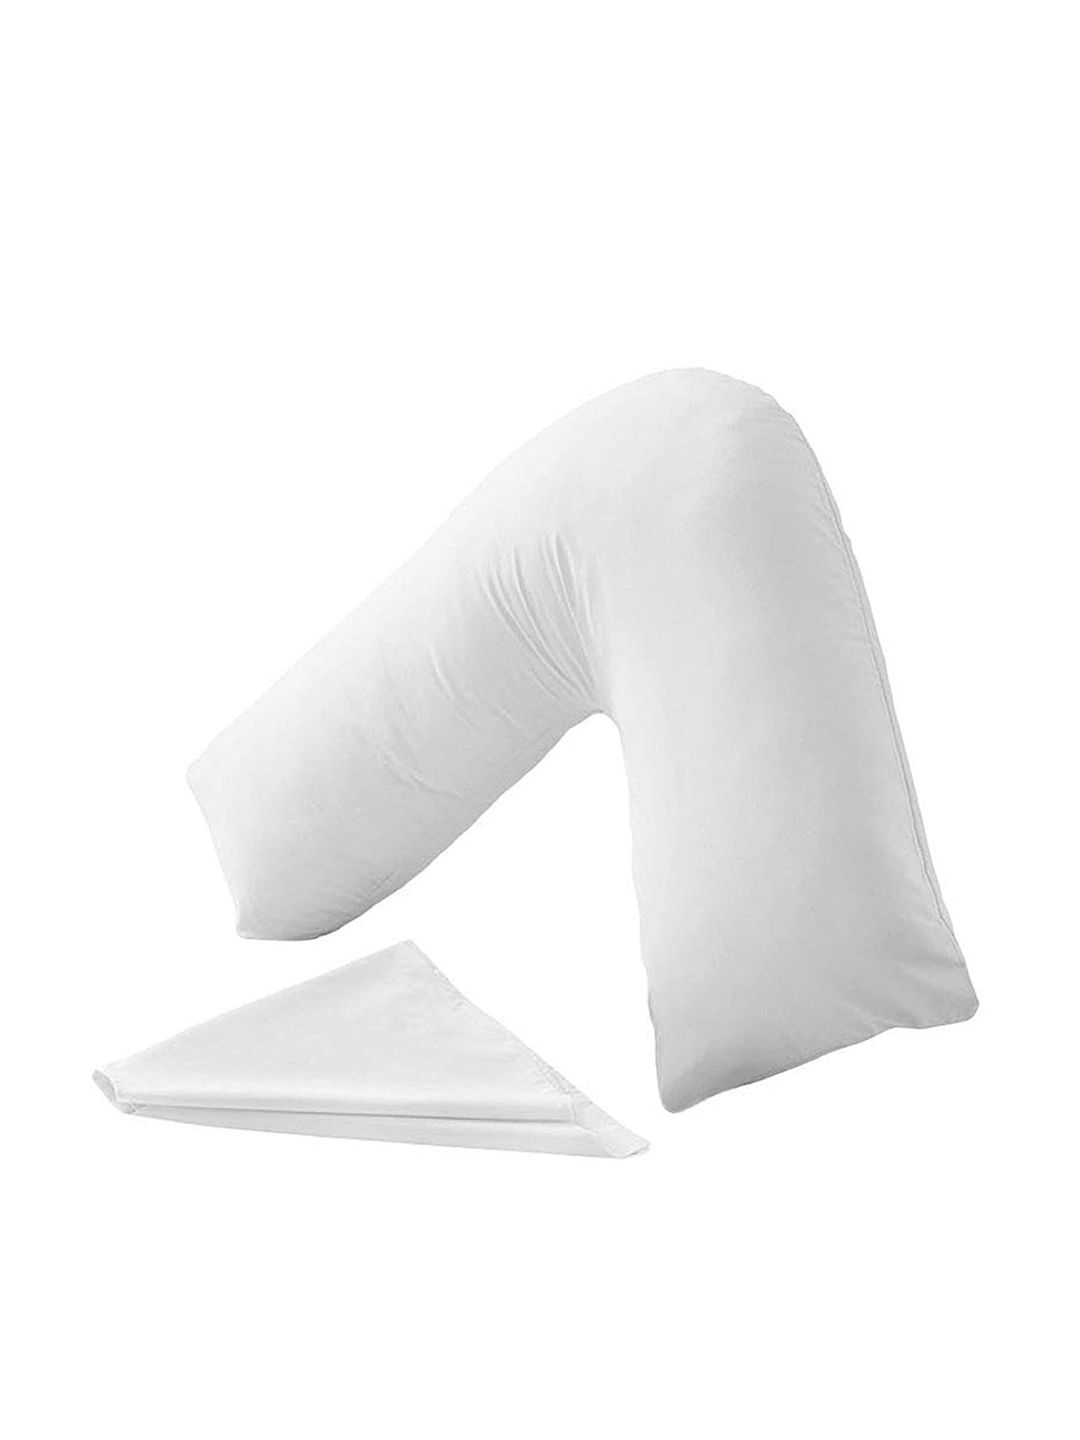 Pum Pum White Solid V-Shaped  Pillow with Pillowcase Price in India